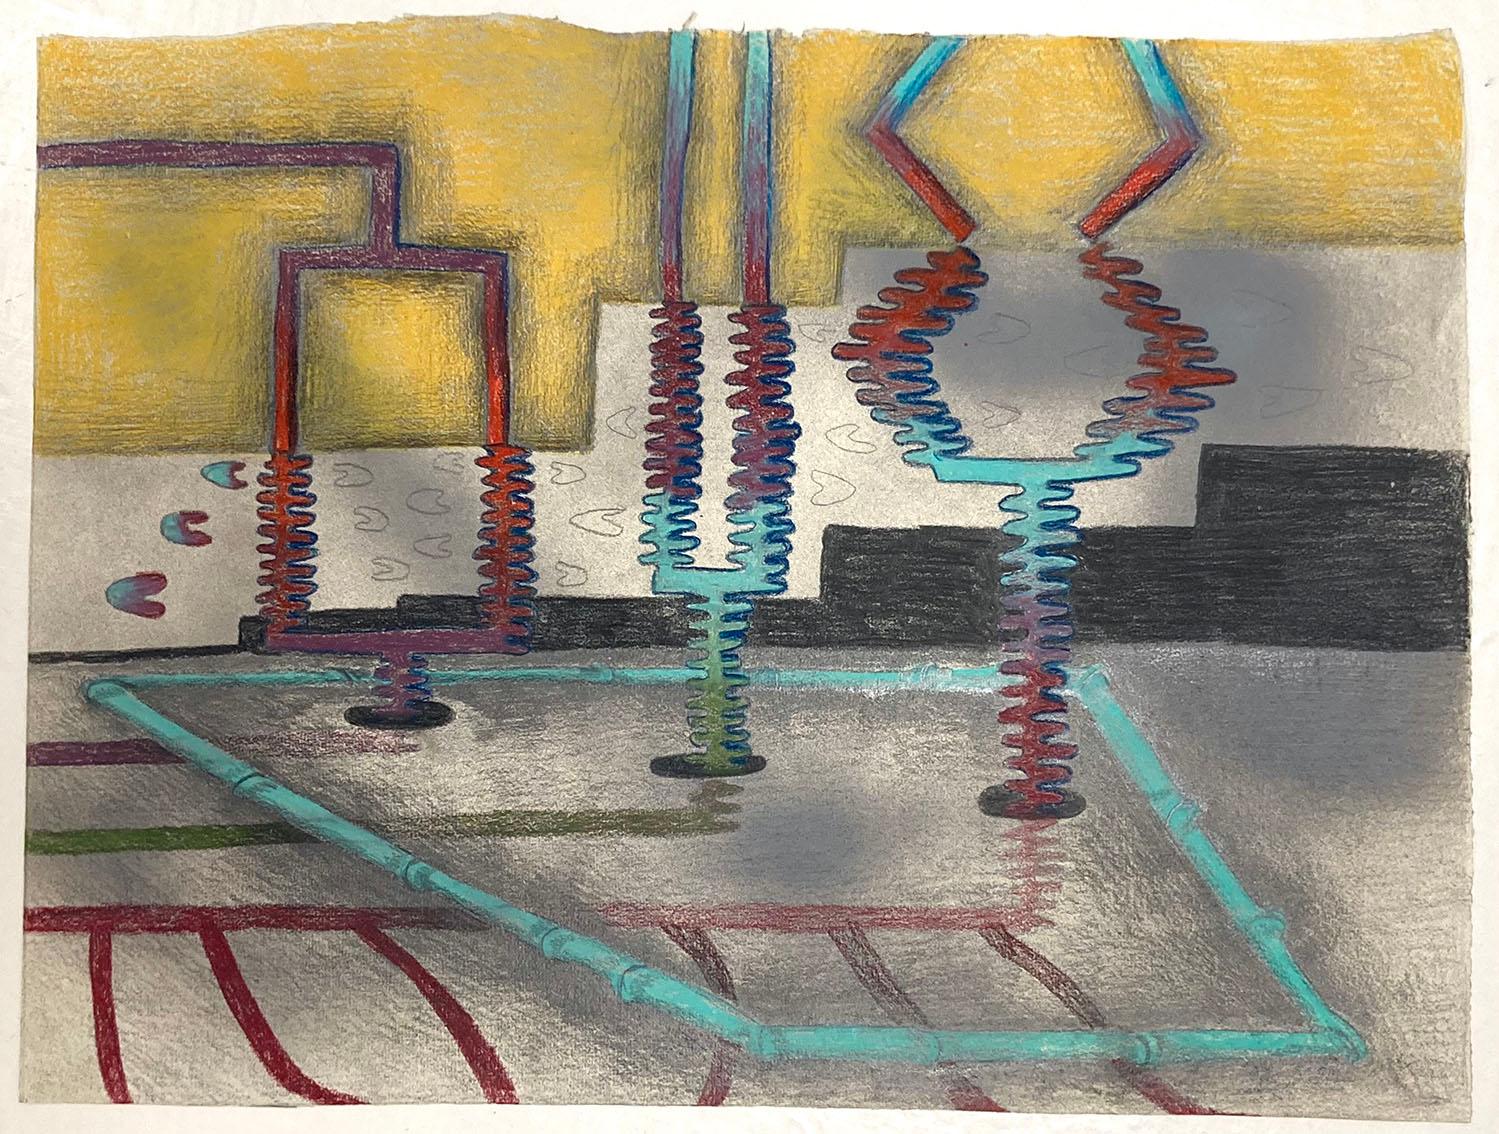 'HOT FORKS', 2020
Colour pencil, spray paint and graphite on handmade paper
Signed and dated
29 x 42 cm

Artist Rita Evans’s imaginative practice is an admixture of autonomous practice, creative improvisation and an interest in the haptic process of